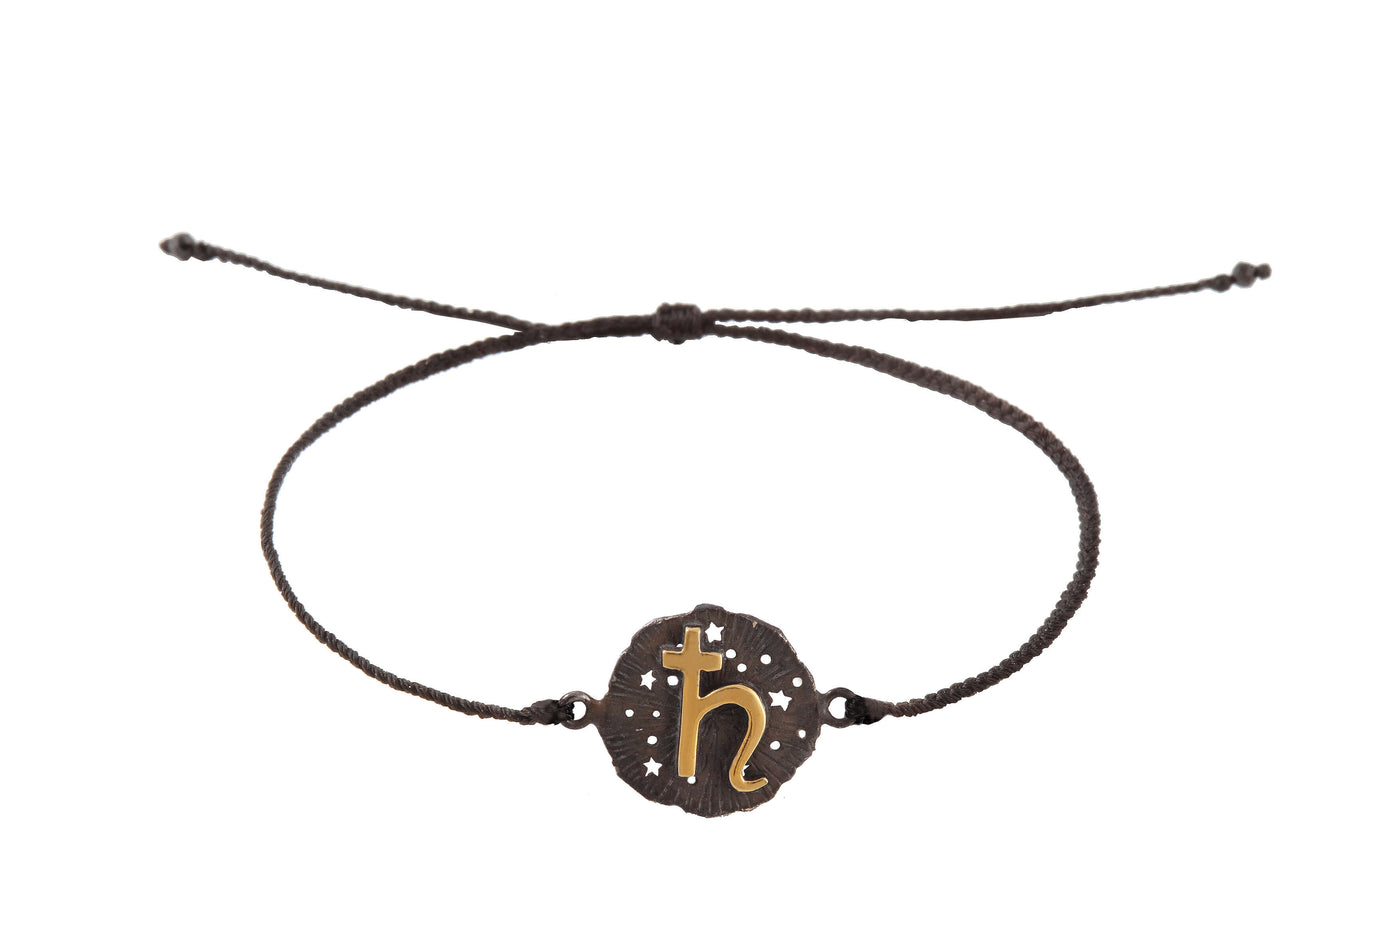 String bracelet with Saturn medallion amulet. Gold plated and oxide